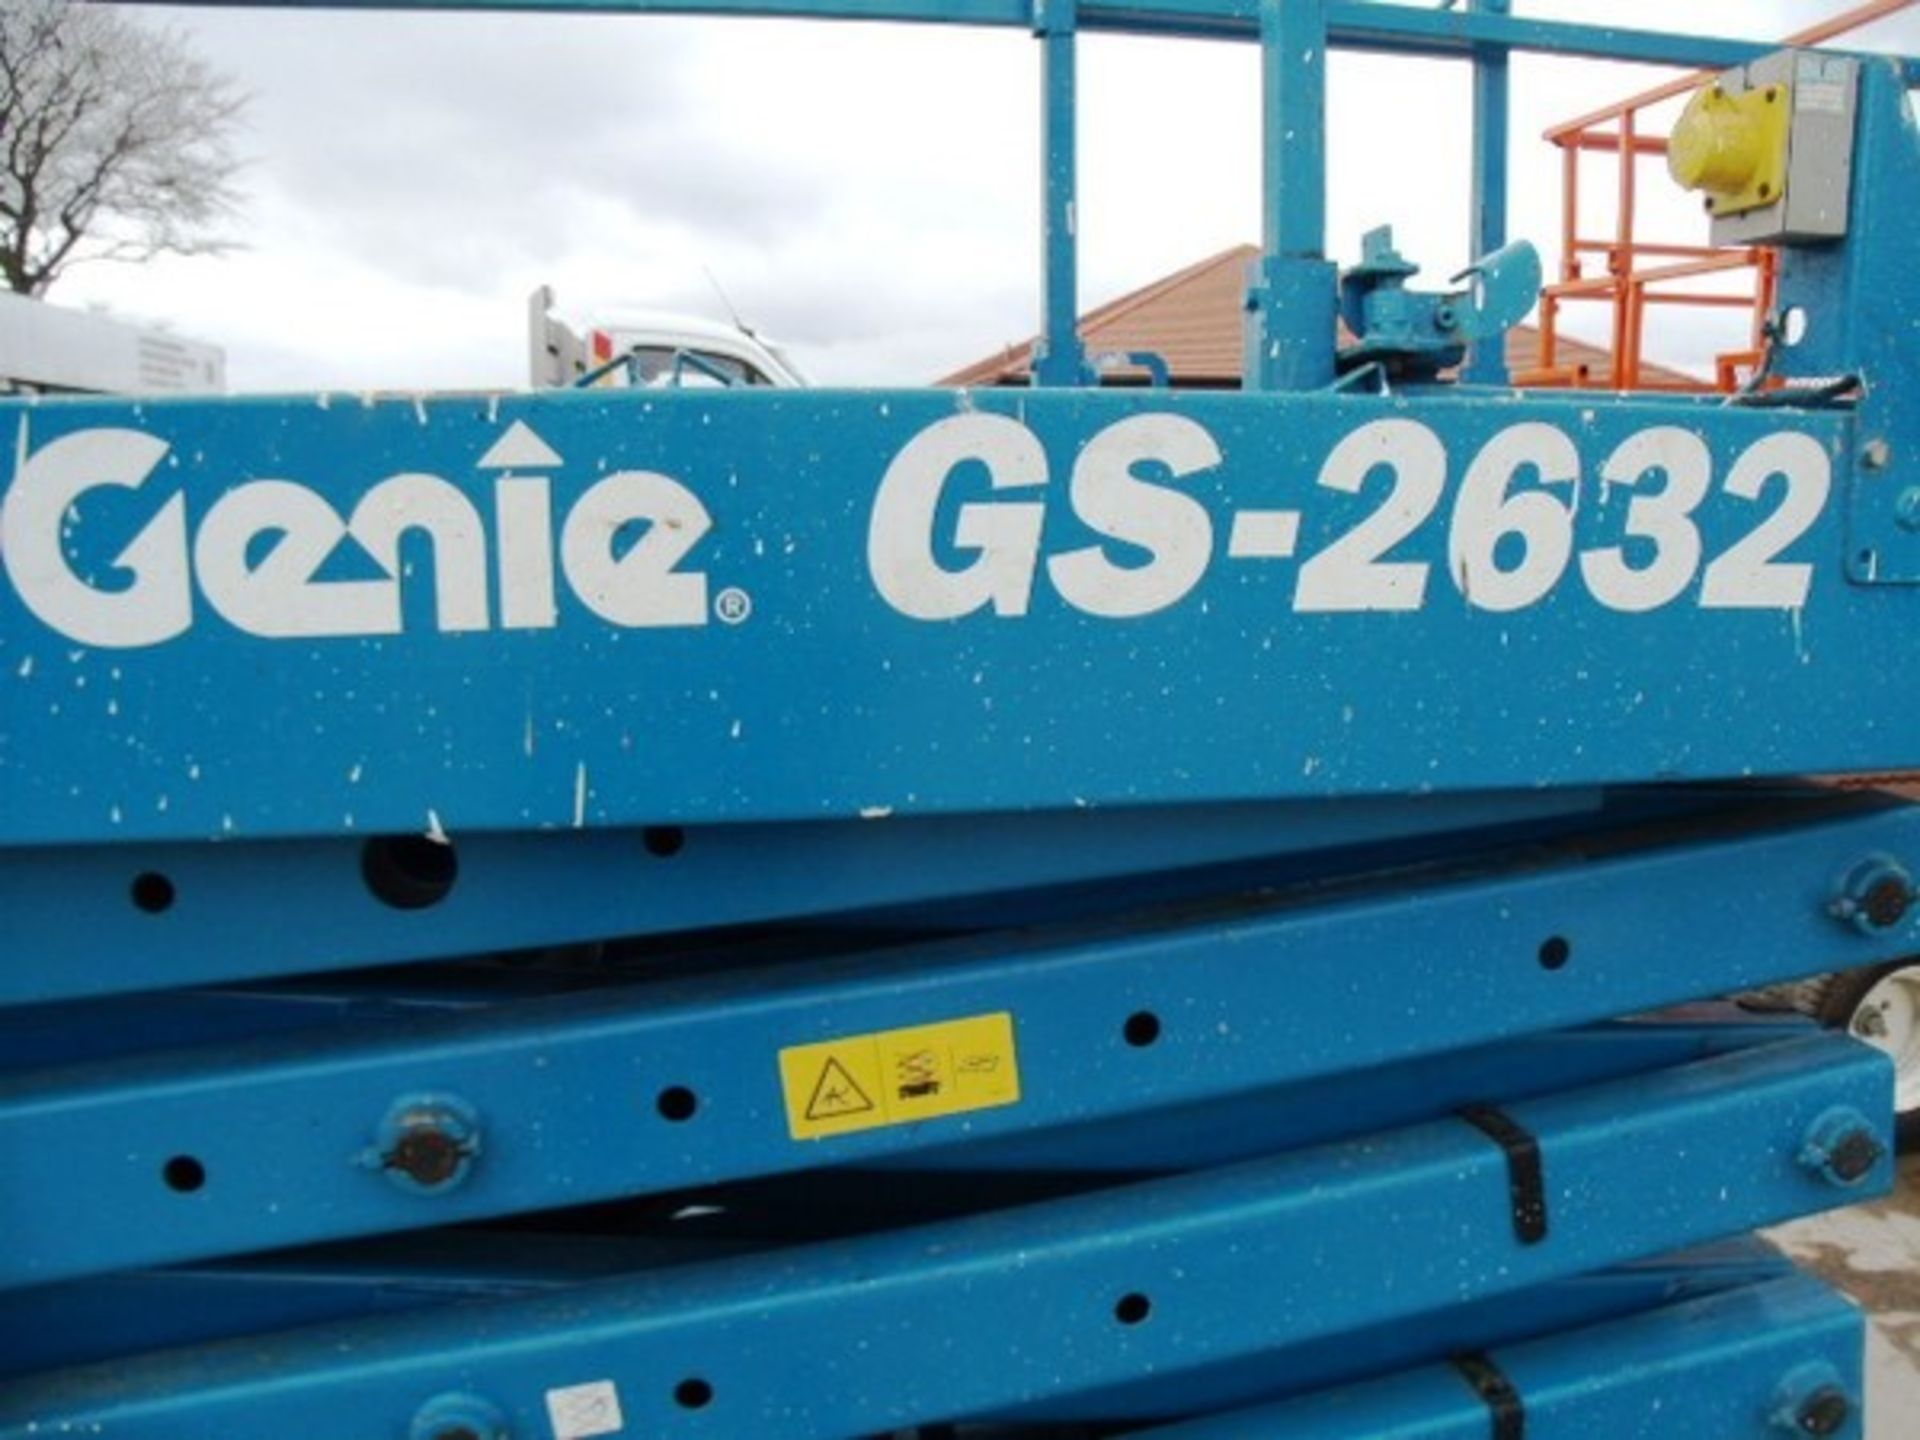 2007 GENIE 2632, s/n - GS3207/86954, 171hrs (verifed), new battery fitted Aug 2017. - Bild 8 aus 9